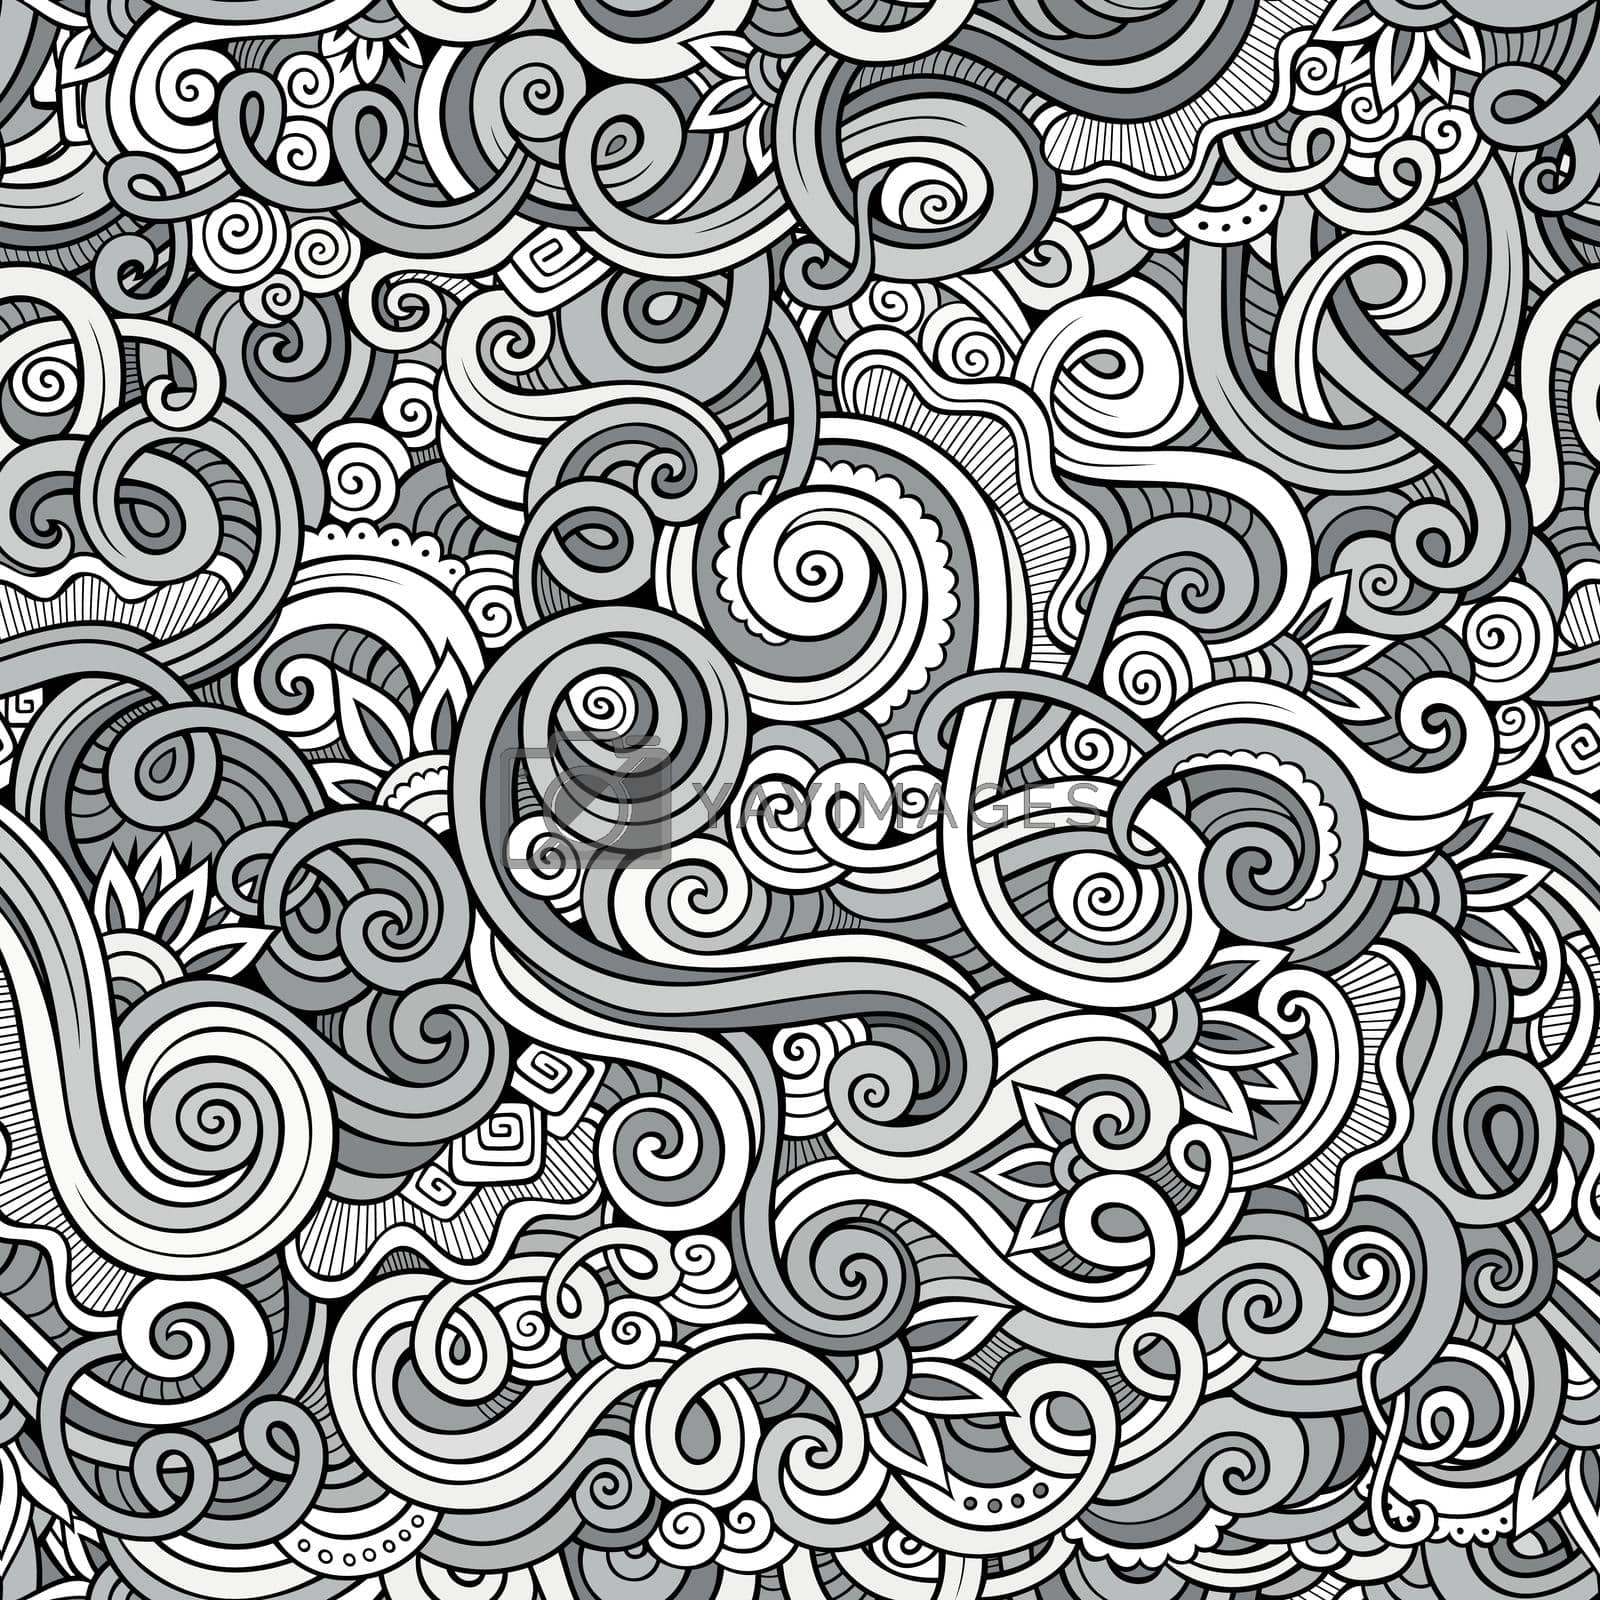 Royalty free image of Decorative hand drawn doodle nature ornamental curl seamless pattern by balabolka